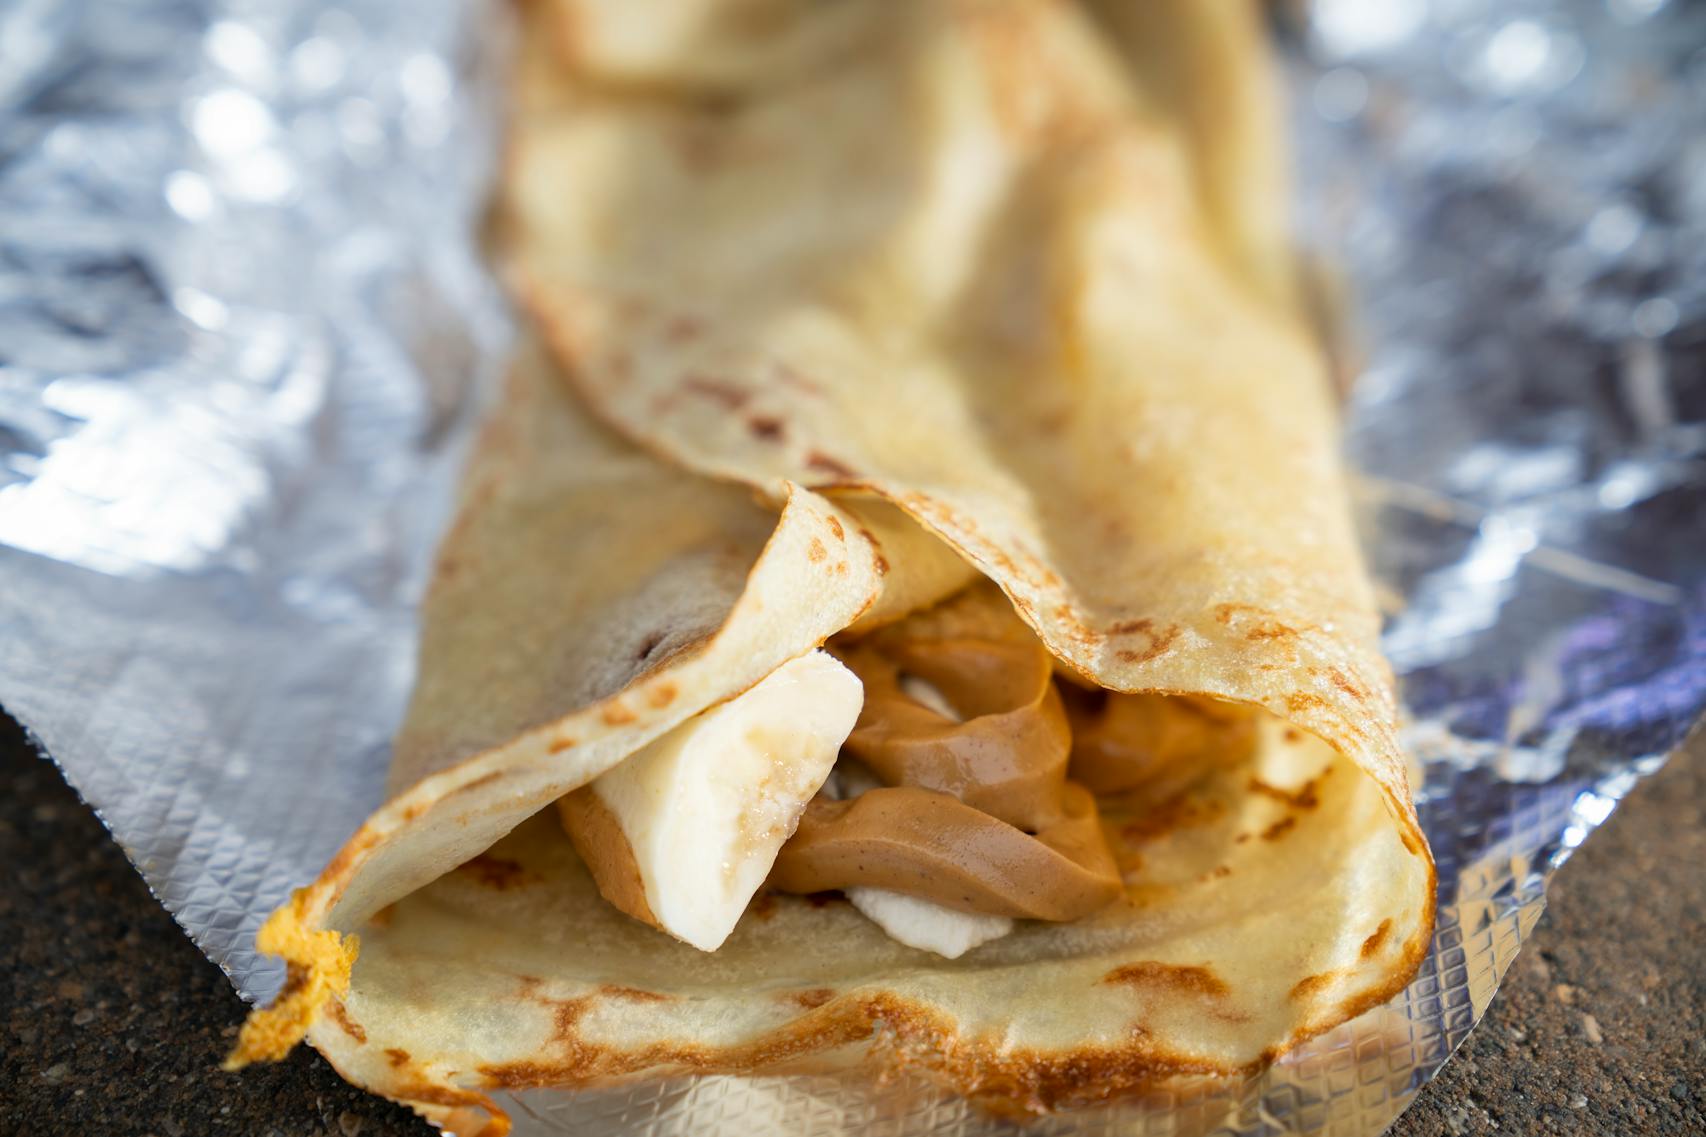 Peanut Butter Banana Crepe from French Creperie. The new foods of the 2023 Minnesota State Fair photographed on the first day of the fair in Falcon Heights, Minn. on Tuesday, Aug. 8, 2023. ] LEILA NAVIDI • leila.navidi@startribune.com